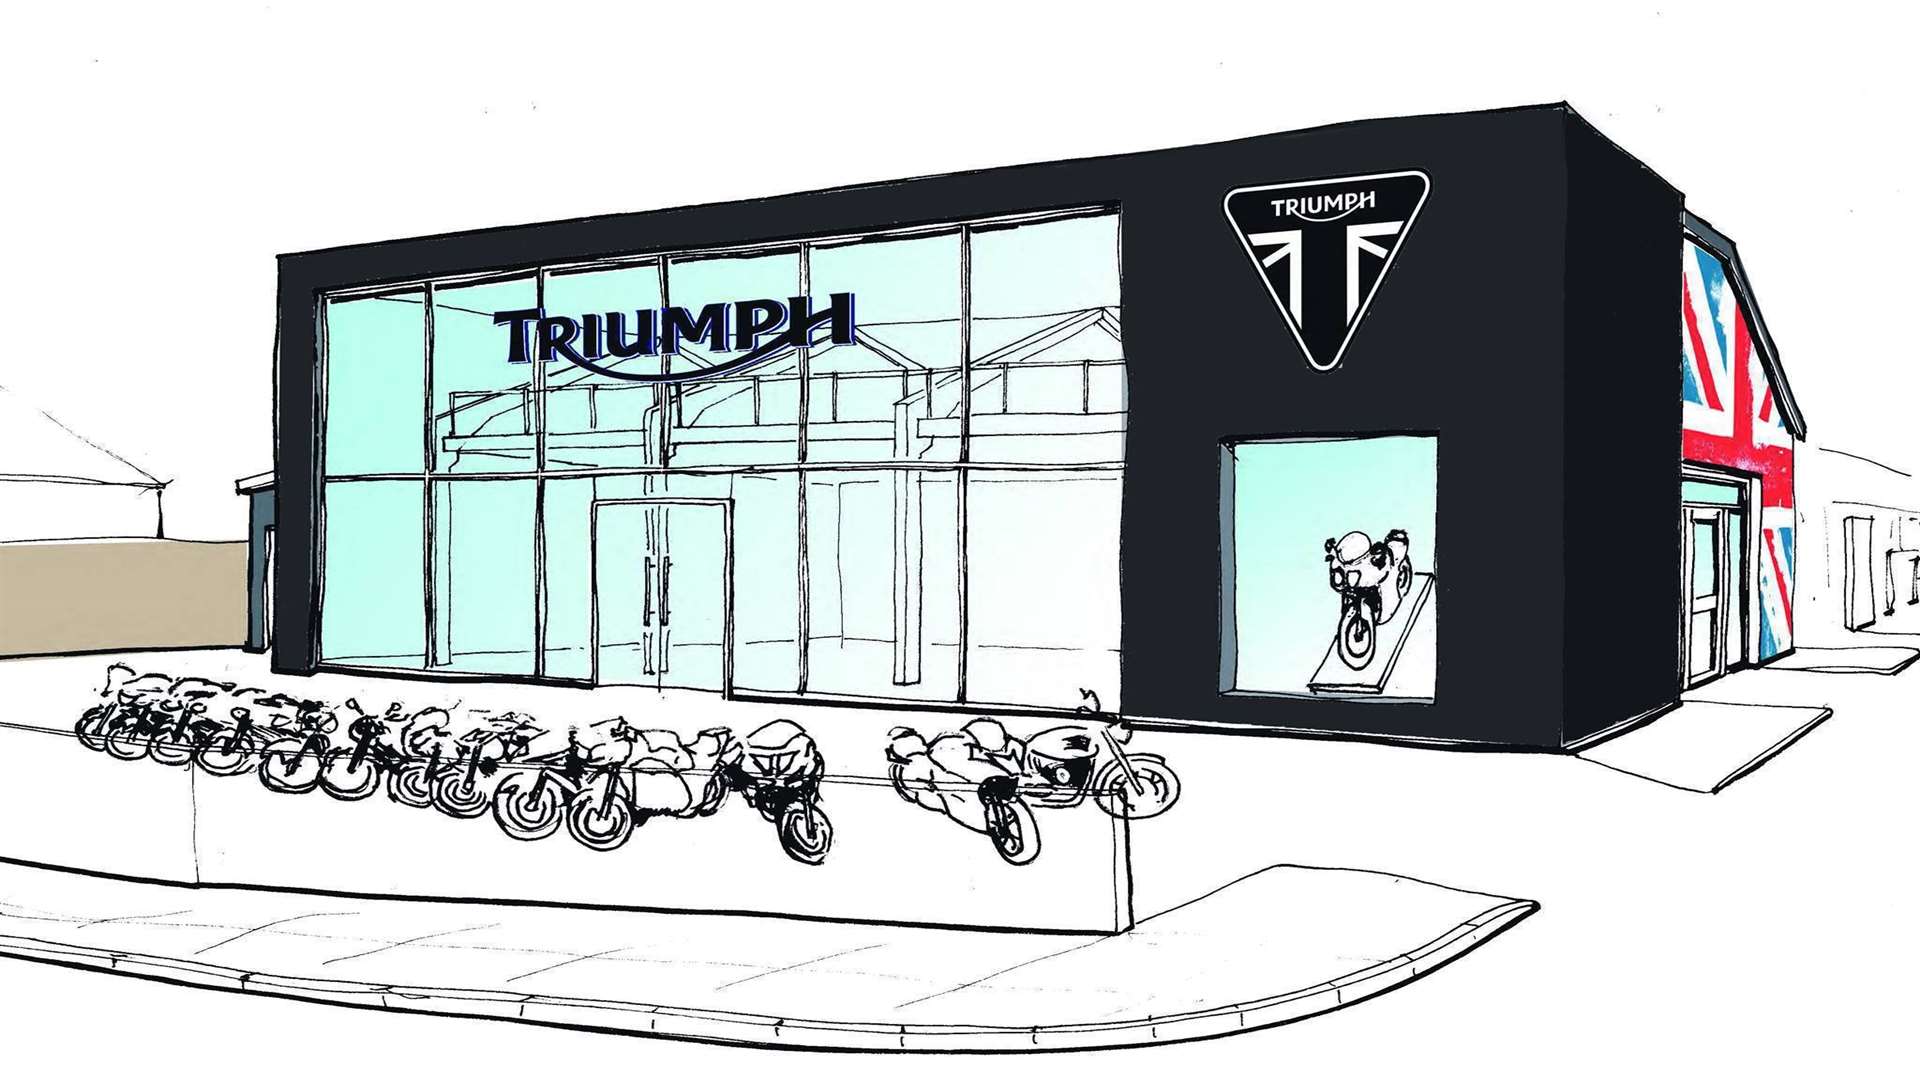 How the Triumph dealership in Ashford could look